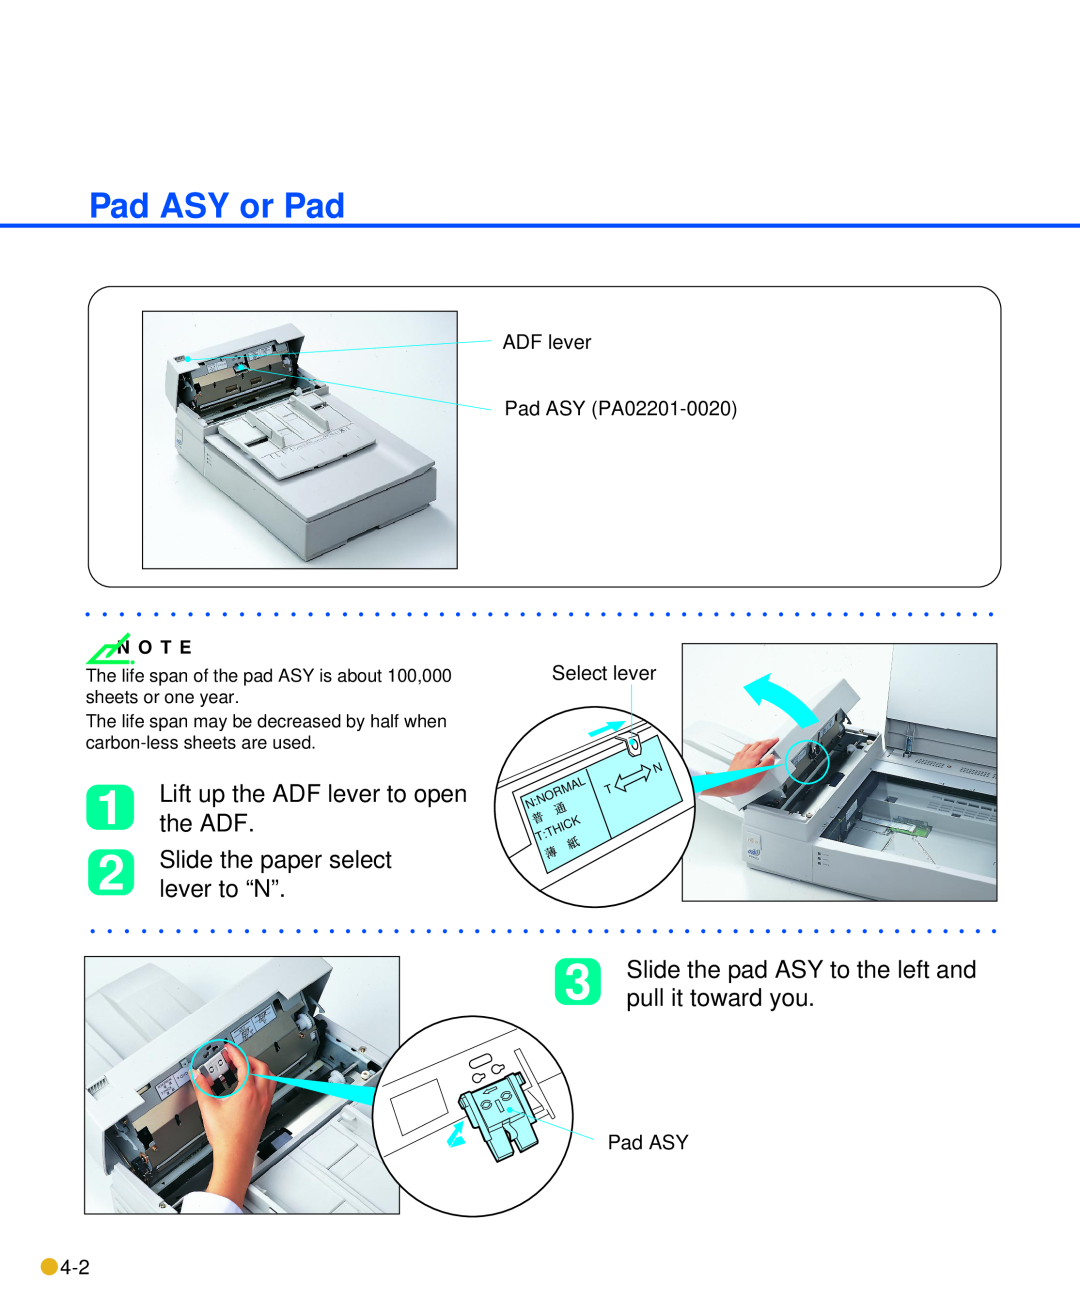 Fujitsu M3093DE/DG Pad ASY or Pad, Lift up the ADF lever to open, Slide the paper select, lever to “N”, pull it toward you 